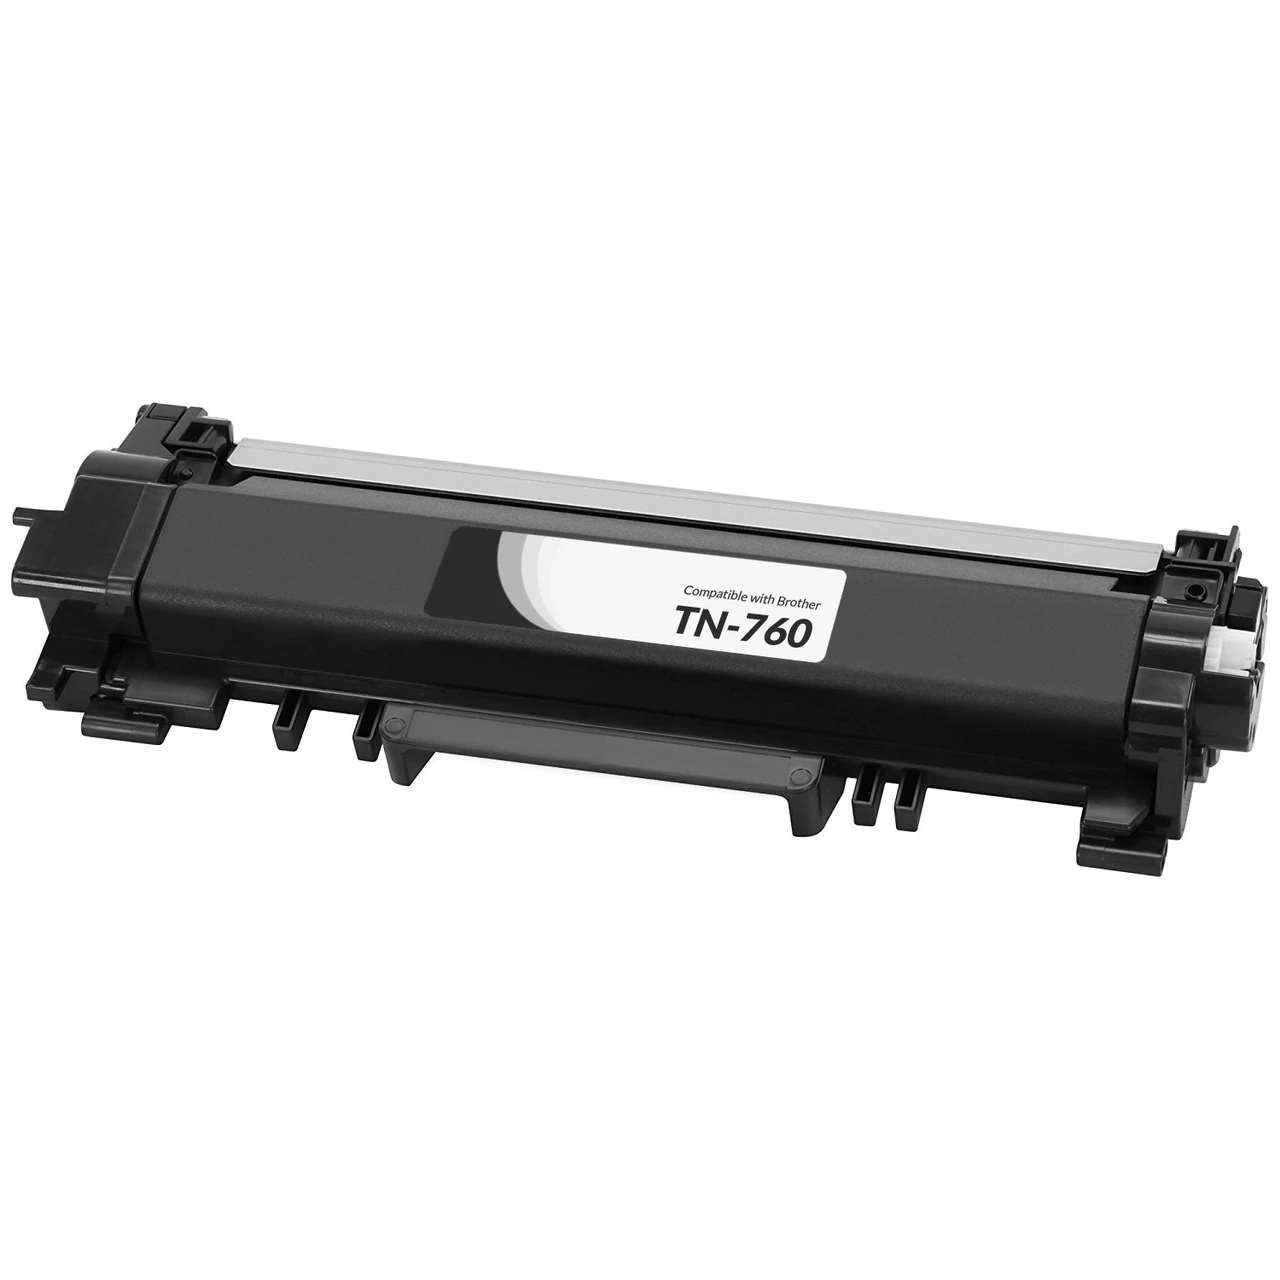 Black Compatible Cartridge for Brother TN760 3,000 Page Yield -High Yield)